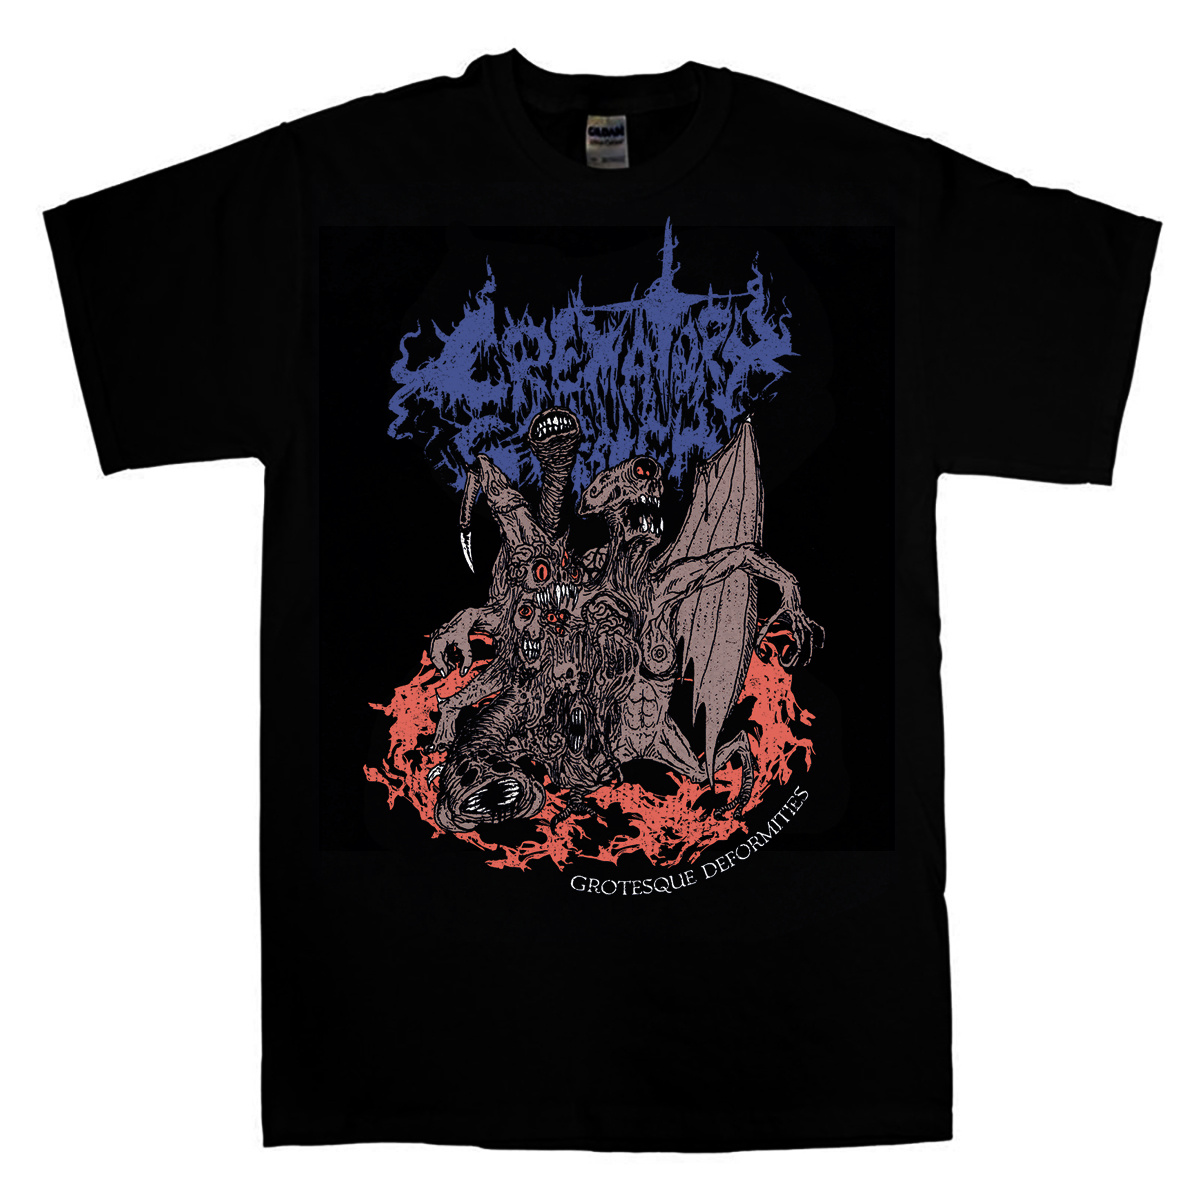 CREMATORY STENCH - Grotesque Deformities T-SHIRT - Blood Harvest Records